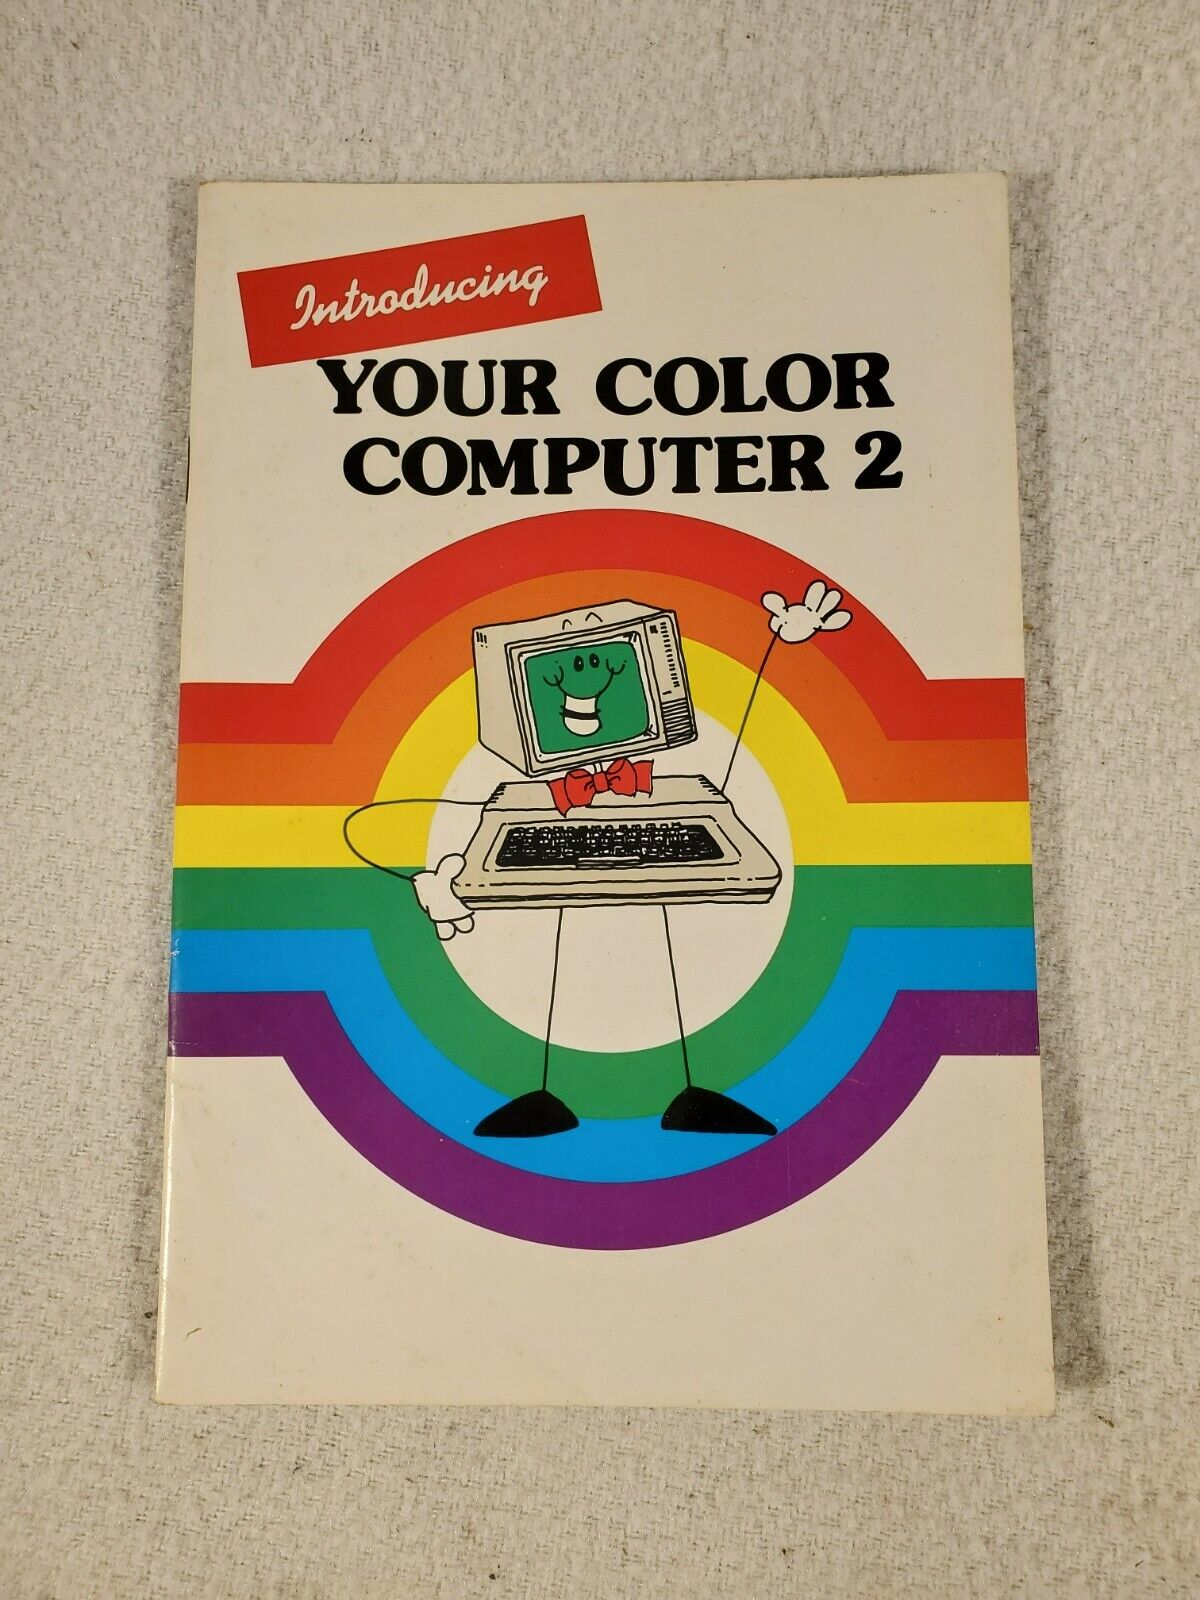 Introducing Your Color Computer 2 Tandy Radio Shack TRS-80 Vintage Manual © 1984